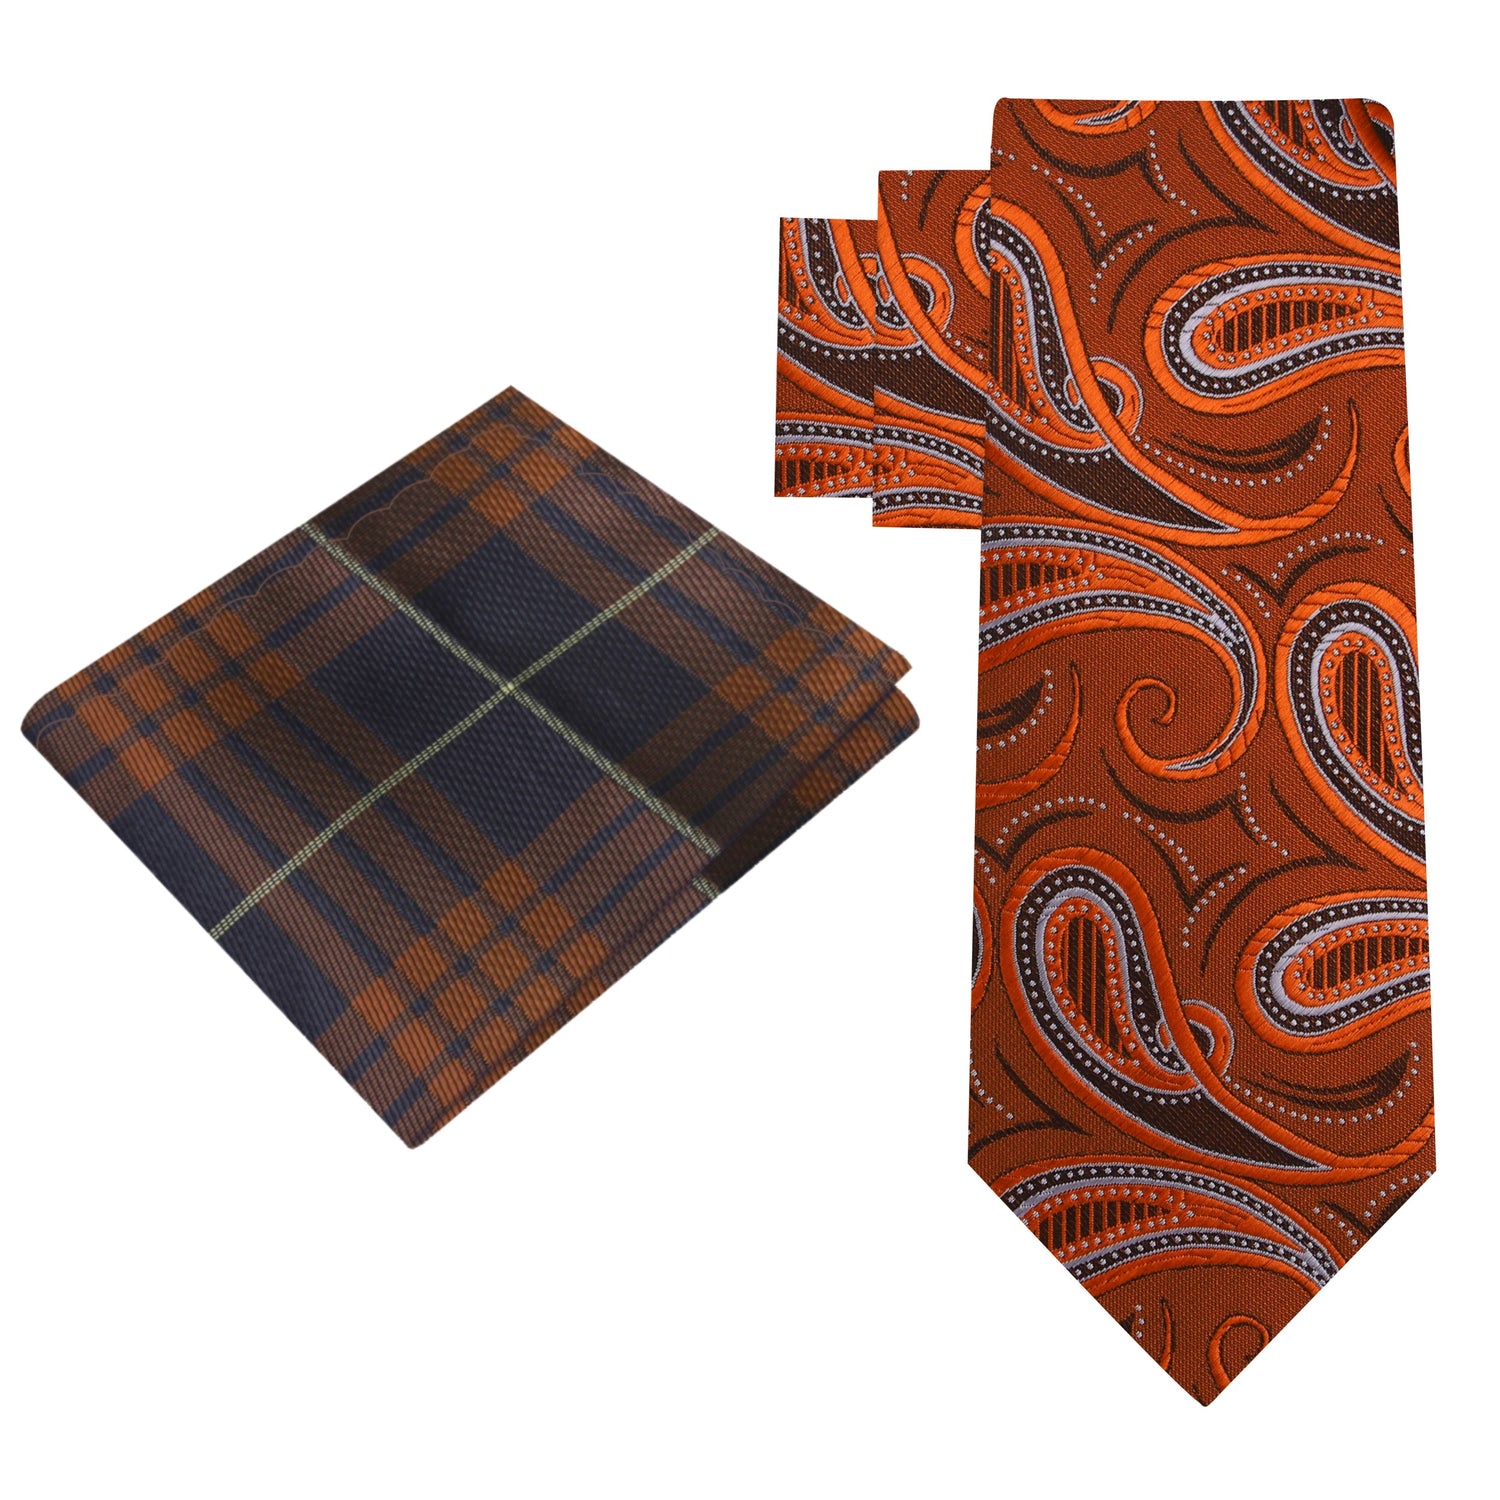 Alt View: Orange and Brown Paisley Necktie and Brown and Blue Plaid Square